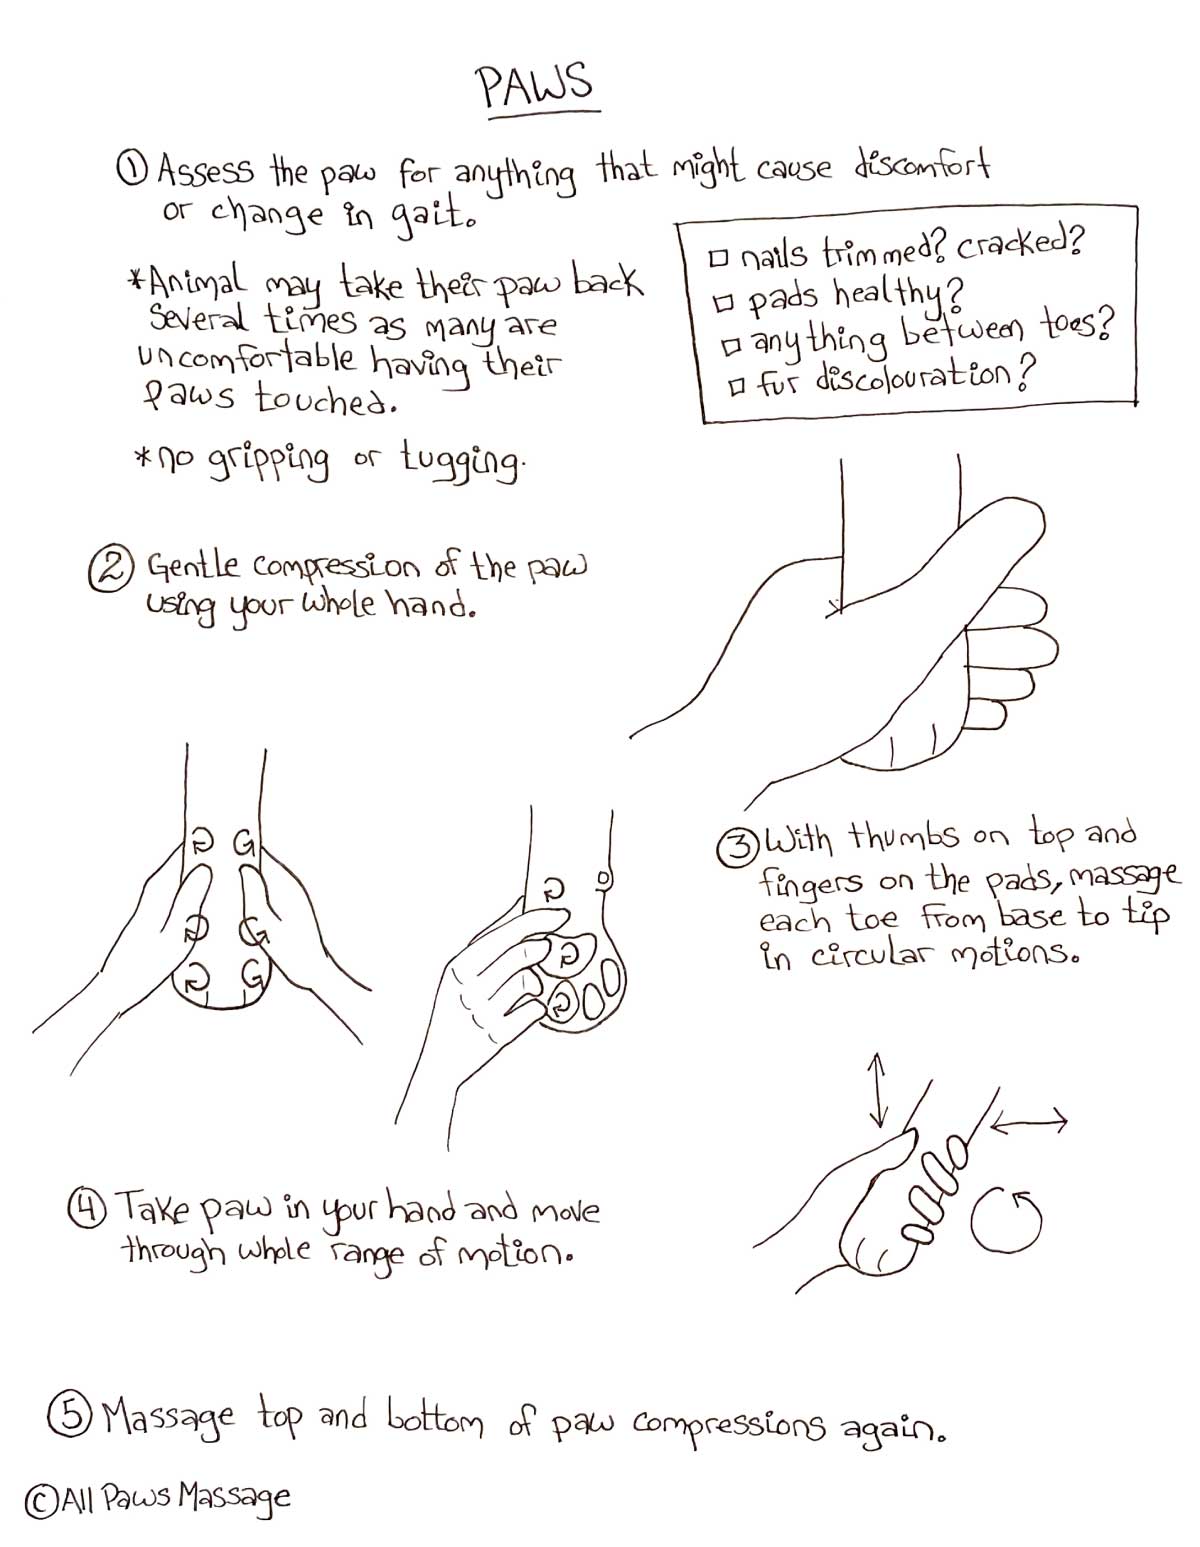 Graphic showing step by step dog massage technique for paws.